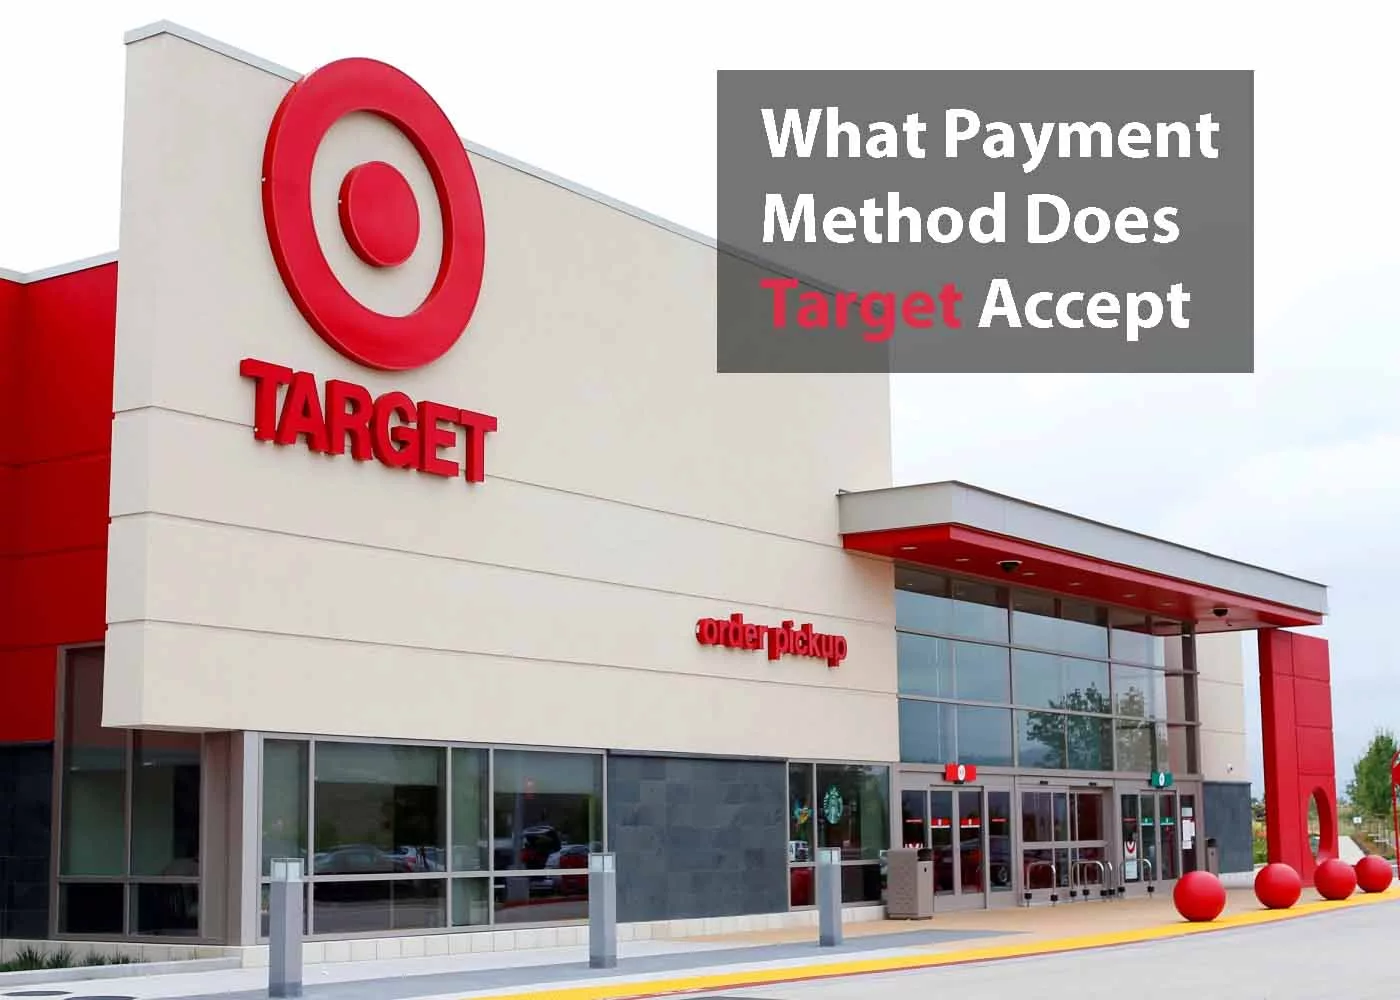 What Payment Method Does Target Accept